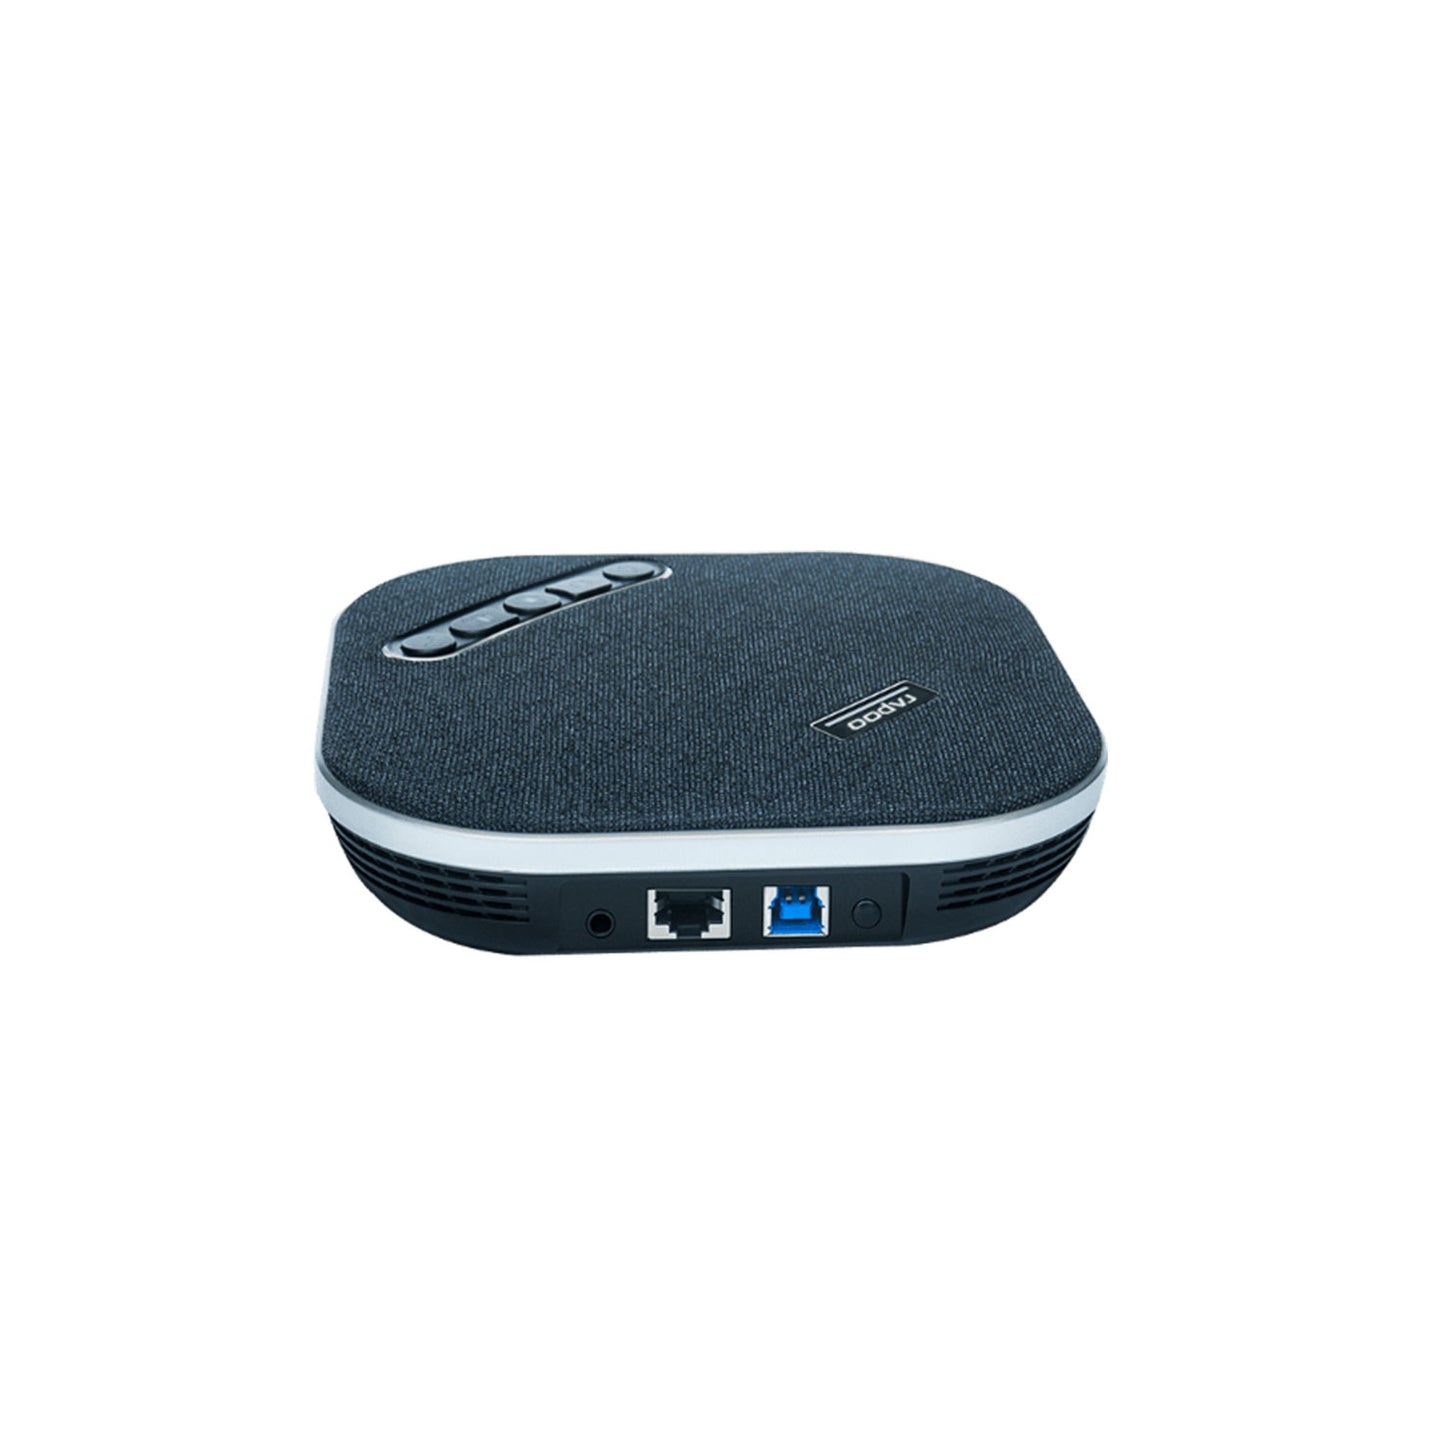 Rapoo CM600EX USB Omnidirectional SpeakerPhone For Conference Room and Meeting Room, 5-8M 360 degrees pickup radios for Zoom/Skype/Teams, Conferencing and Video Calls